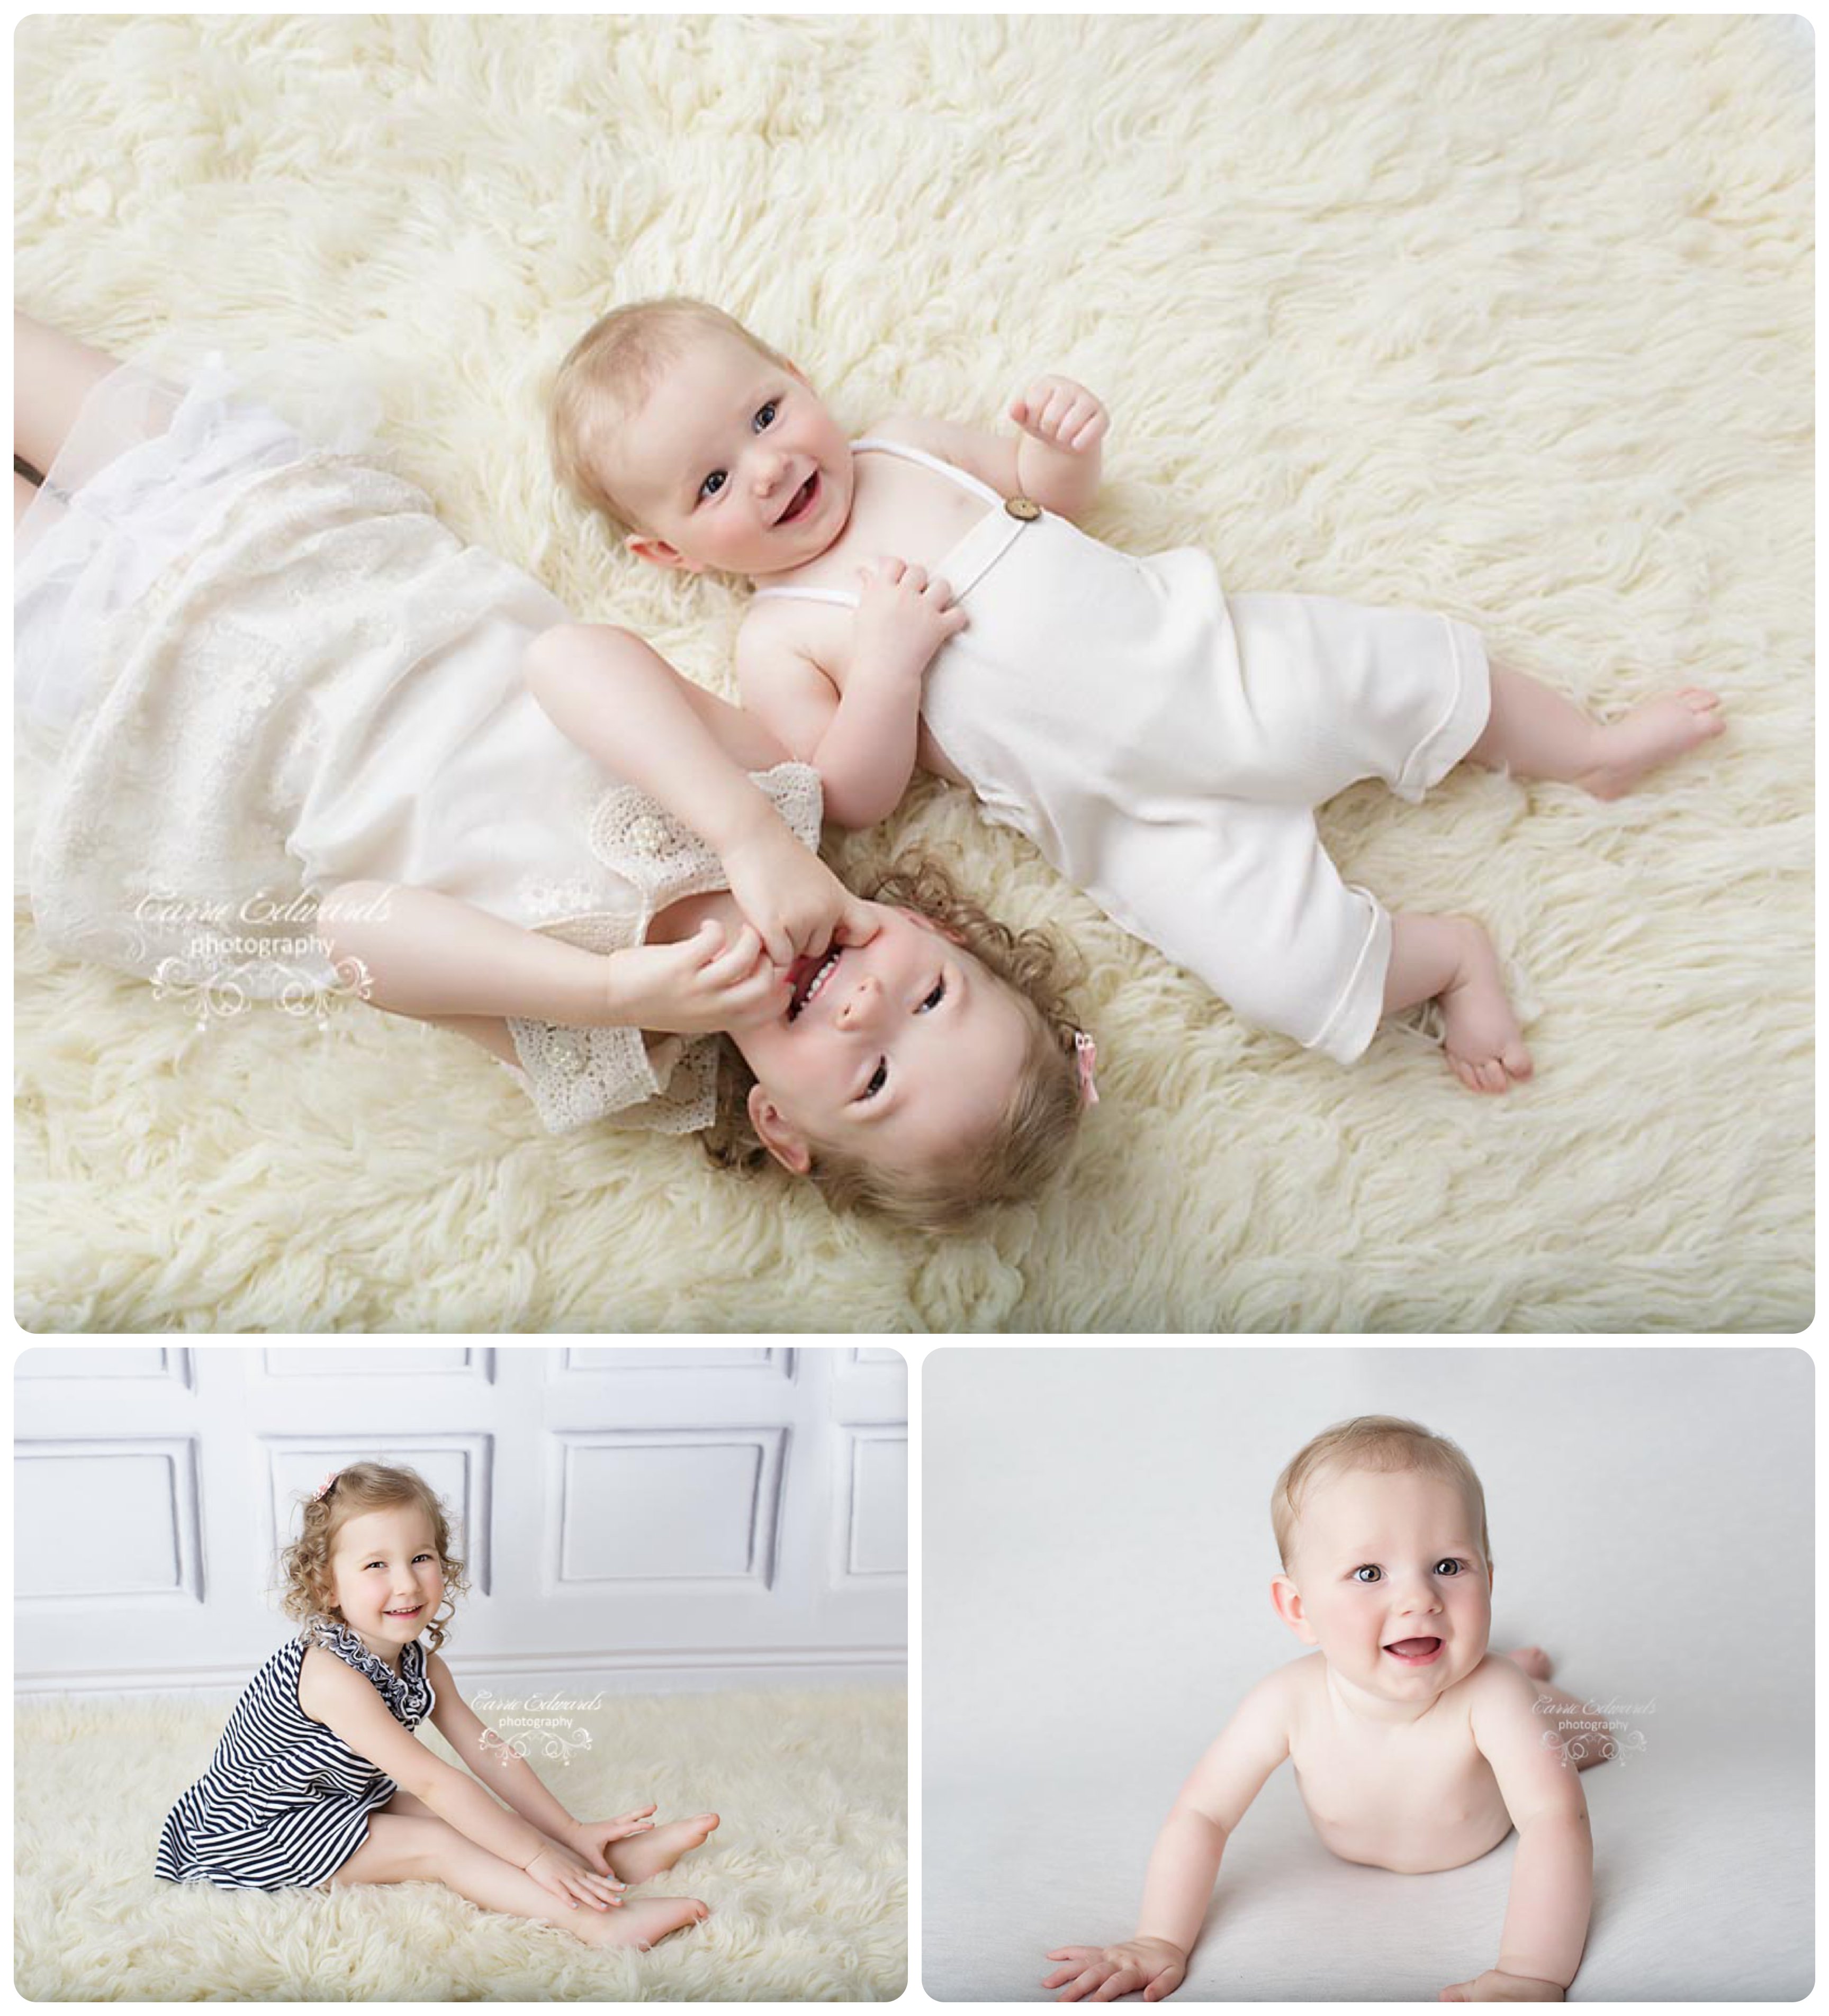 Evergreen Newborn Photographer, Toddler Session, 6 Month Session, Milestone Session, Baby Boy, Cute Baby Boy, Carrie Edwards Photography, Sibling Photos